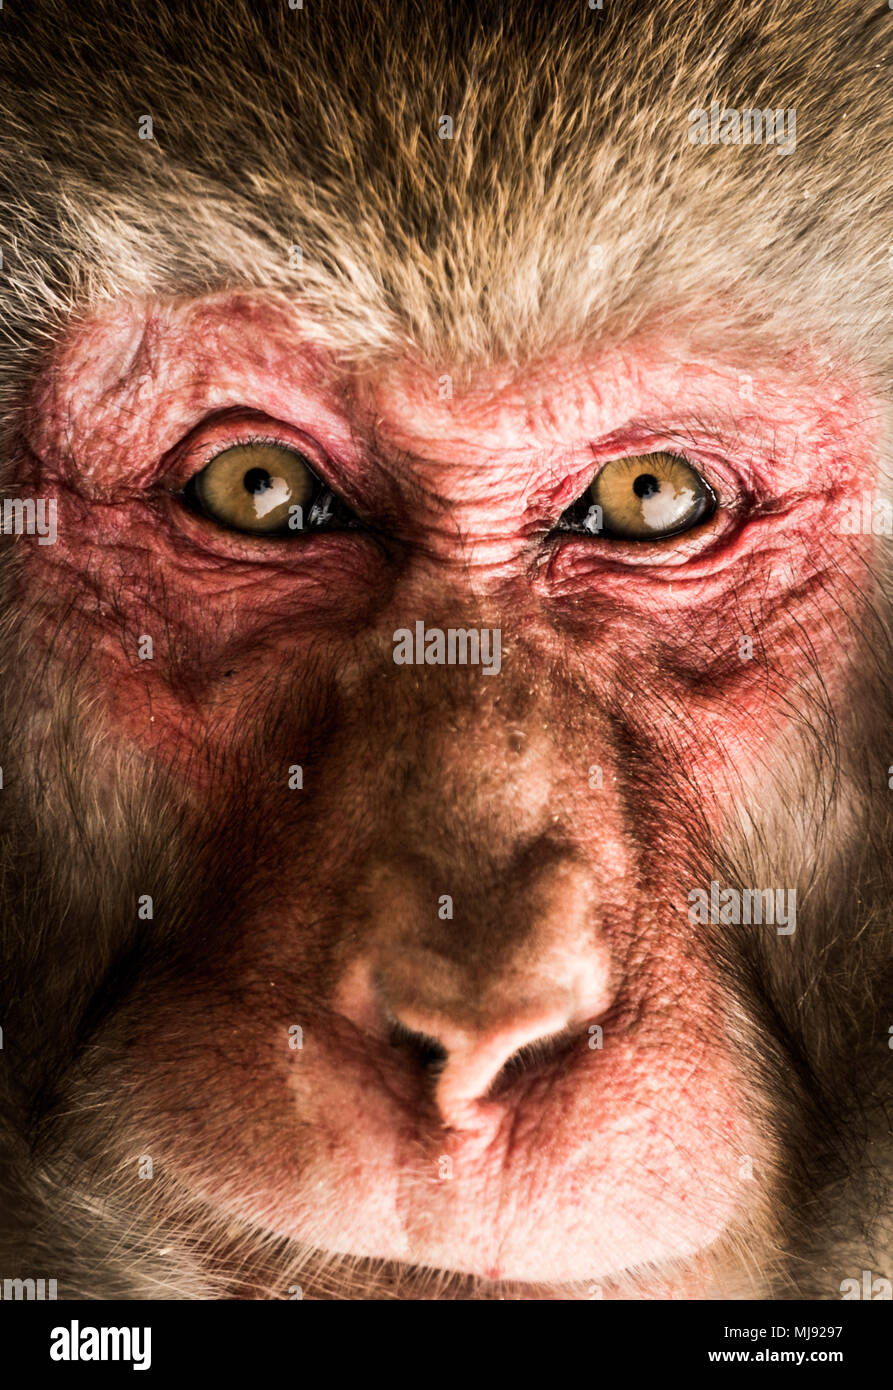 Wild Macaque snow monkey, close-up of face Stock Photo